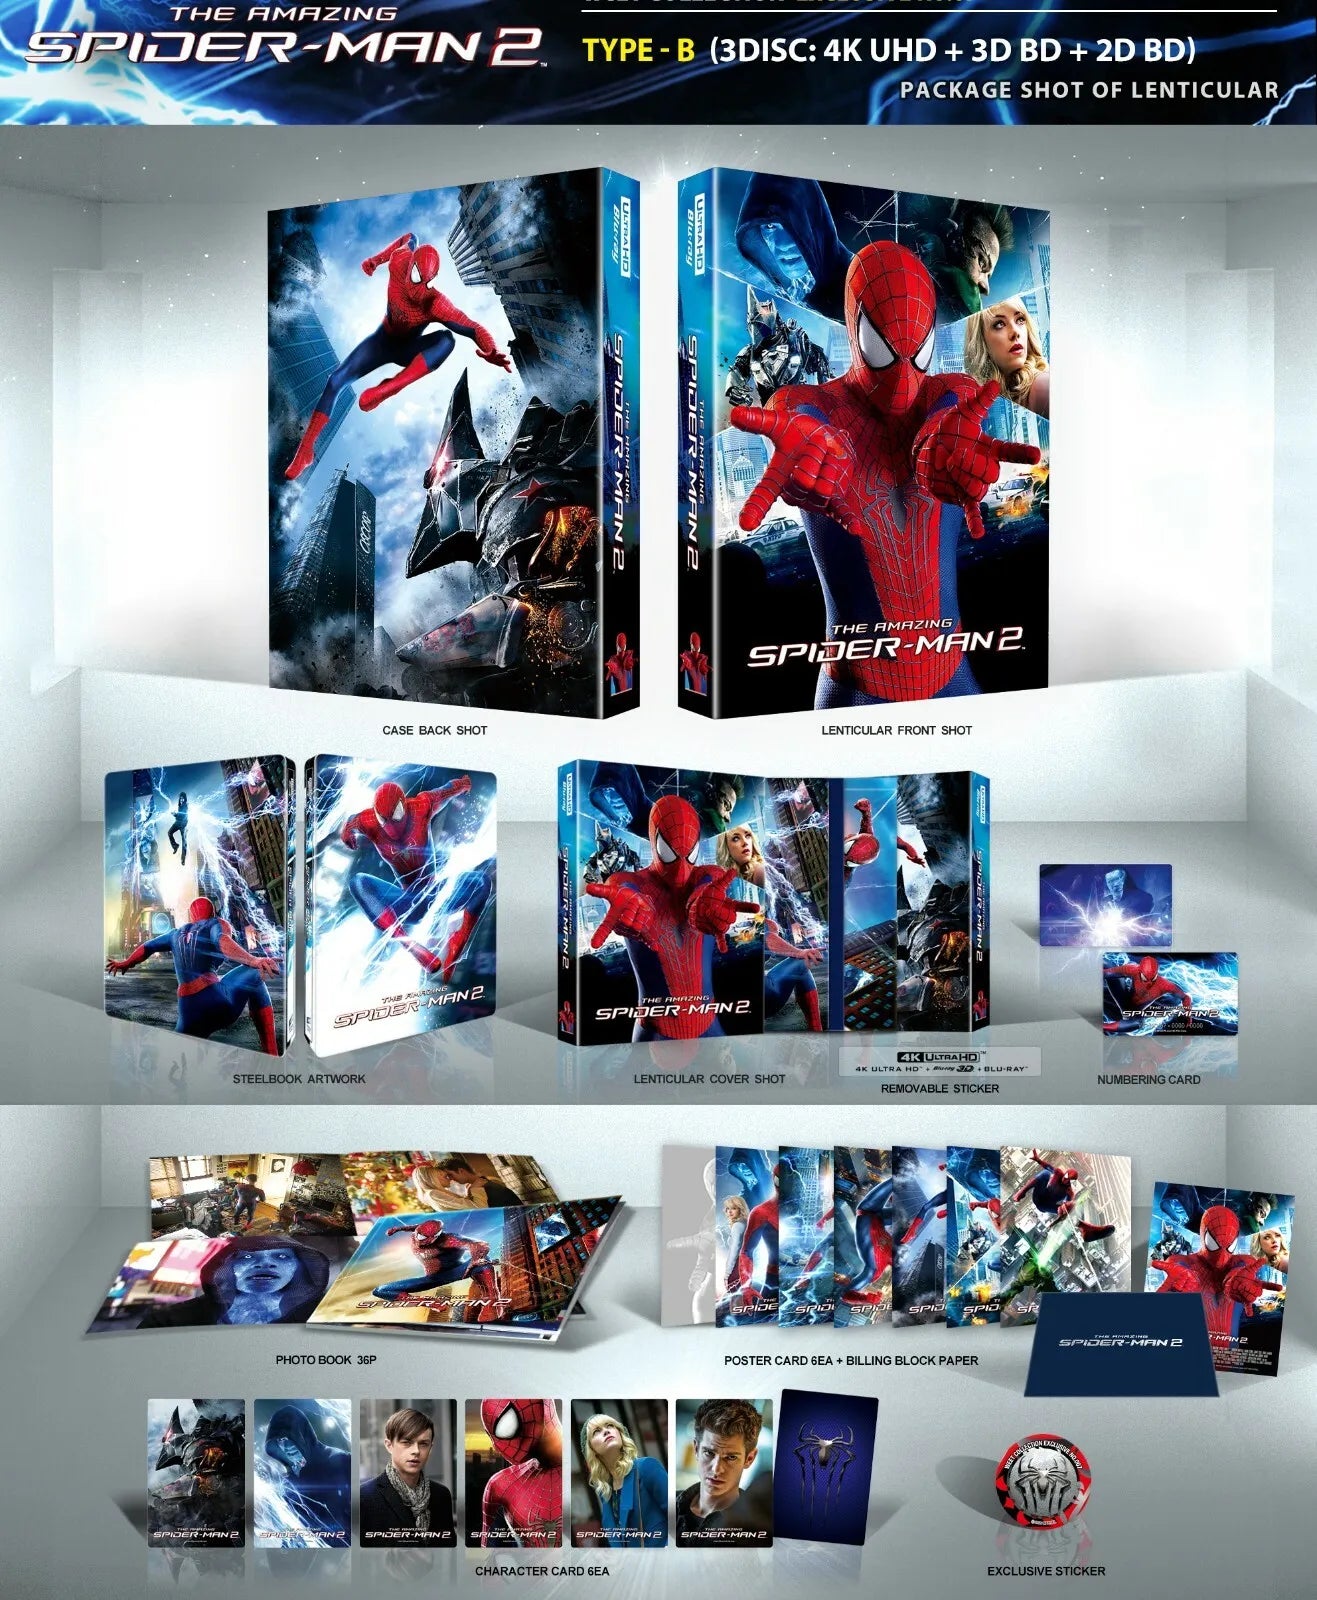 The Amazing Spider-Man 1 & 2 (4K UHD/3D/Blu-Ray) One Click Box Set WEET Collection